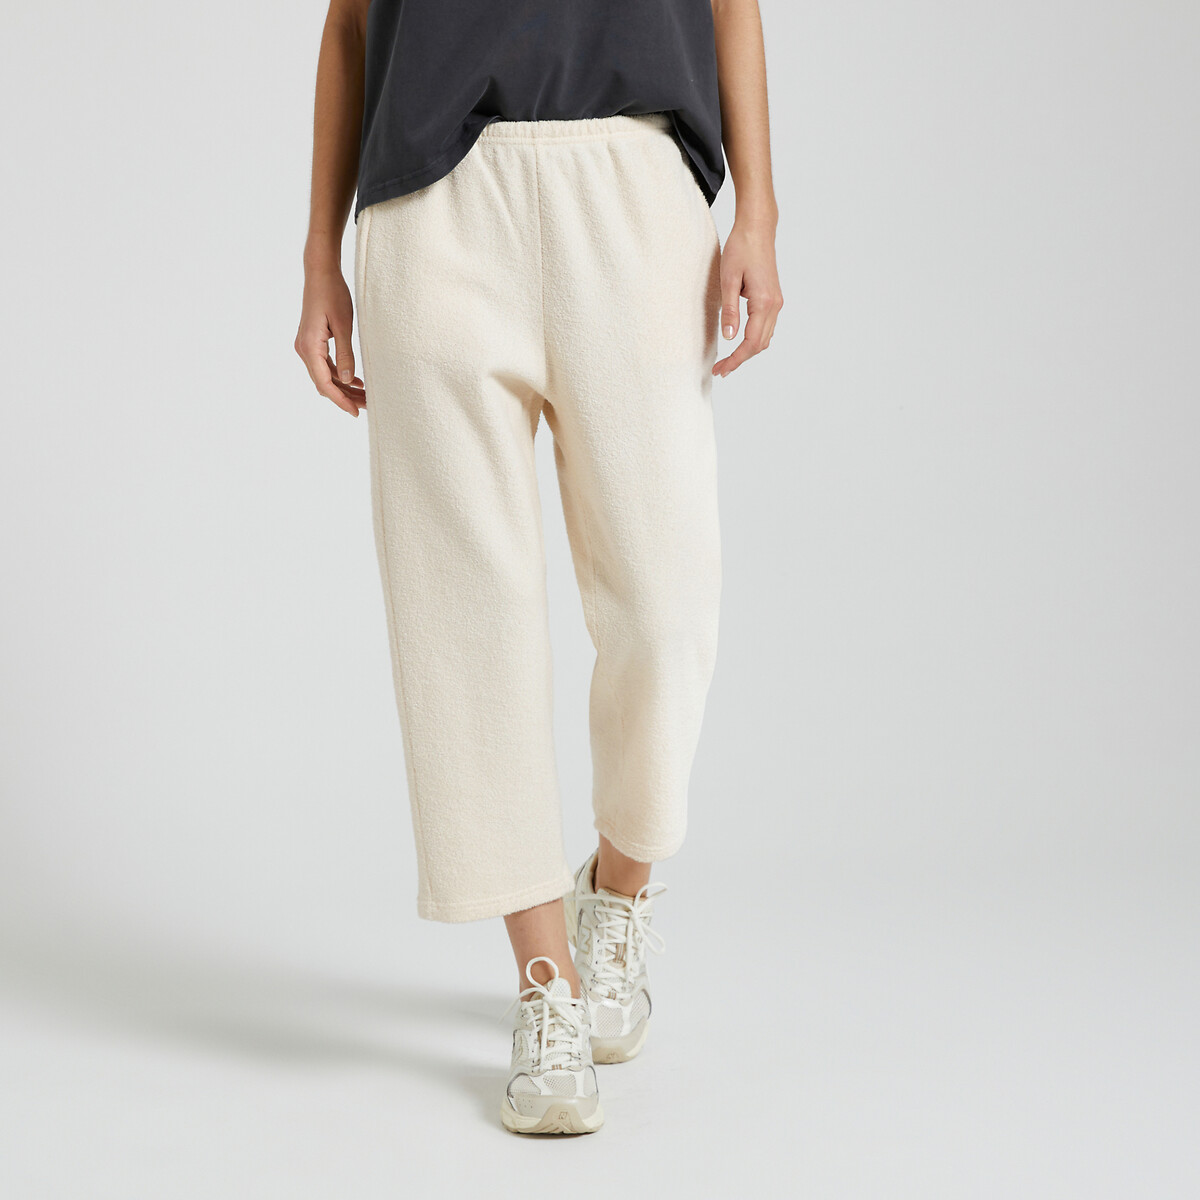 Image of Bobypark Organic Cotton Joggers in a Loose Fit